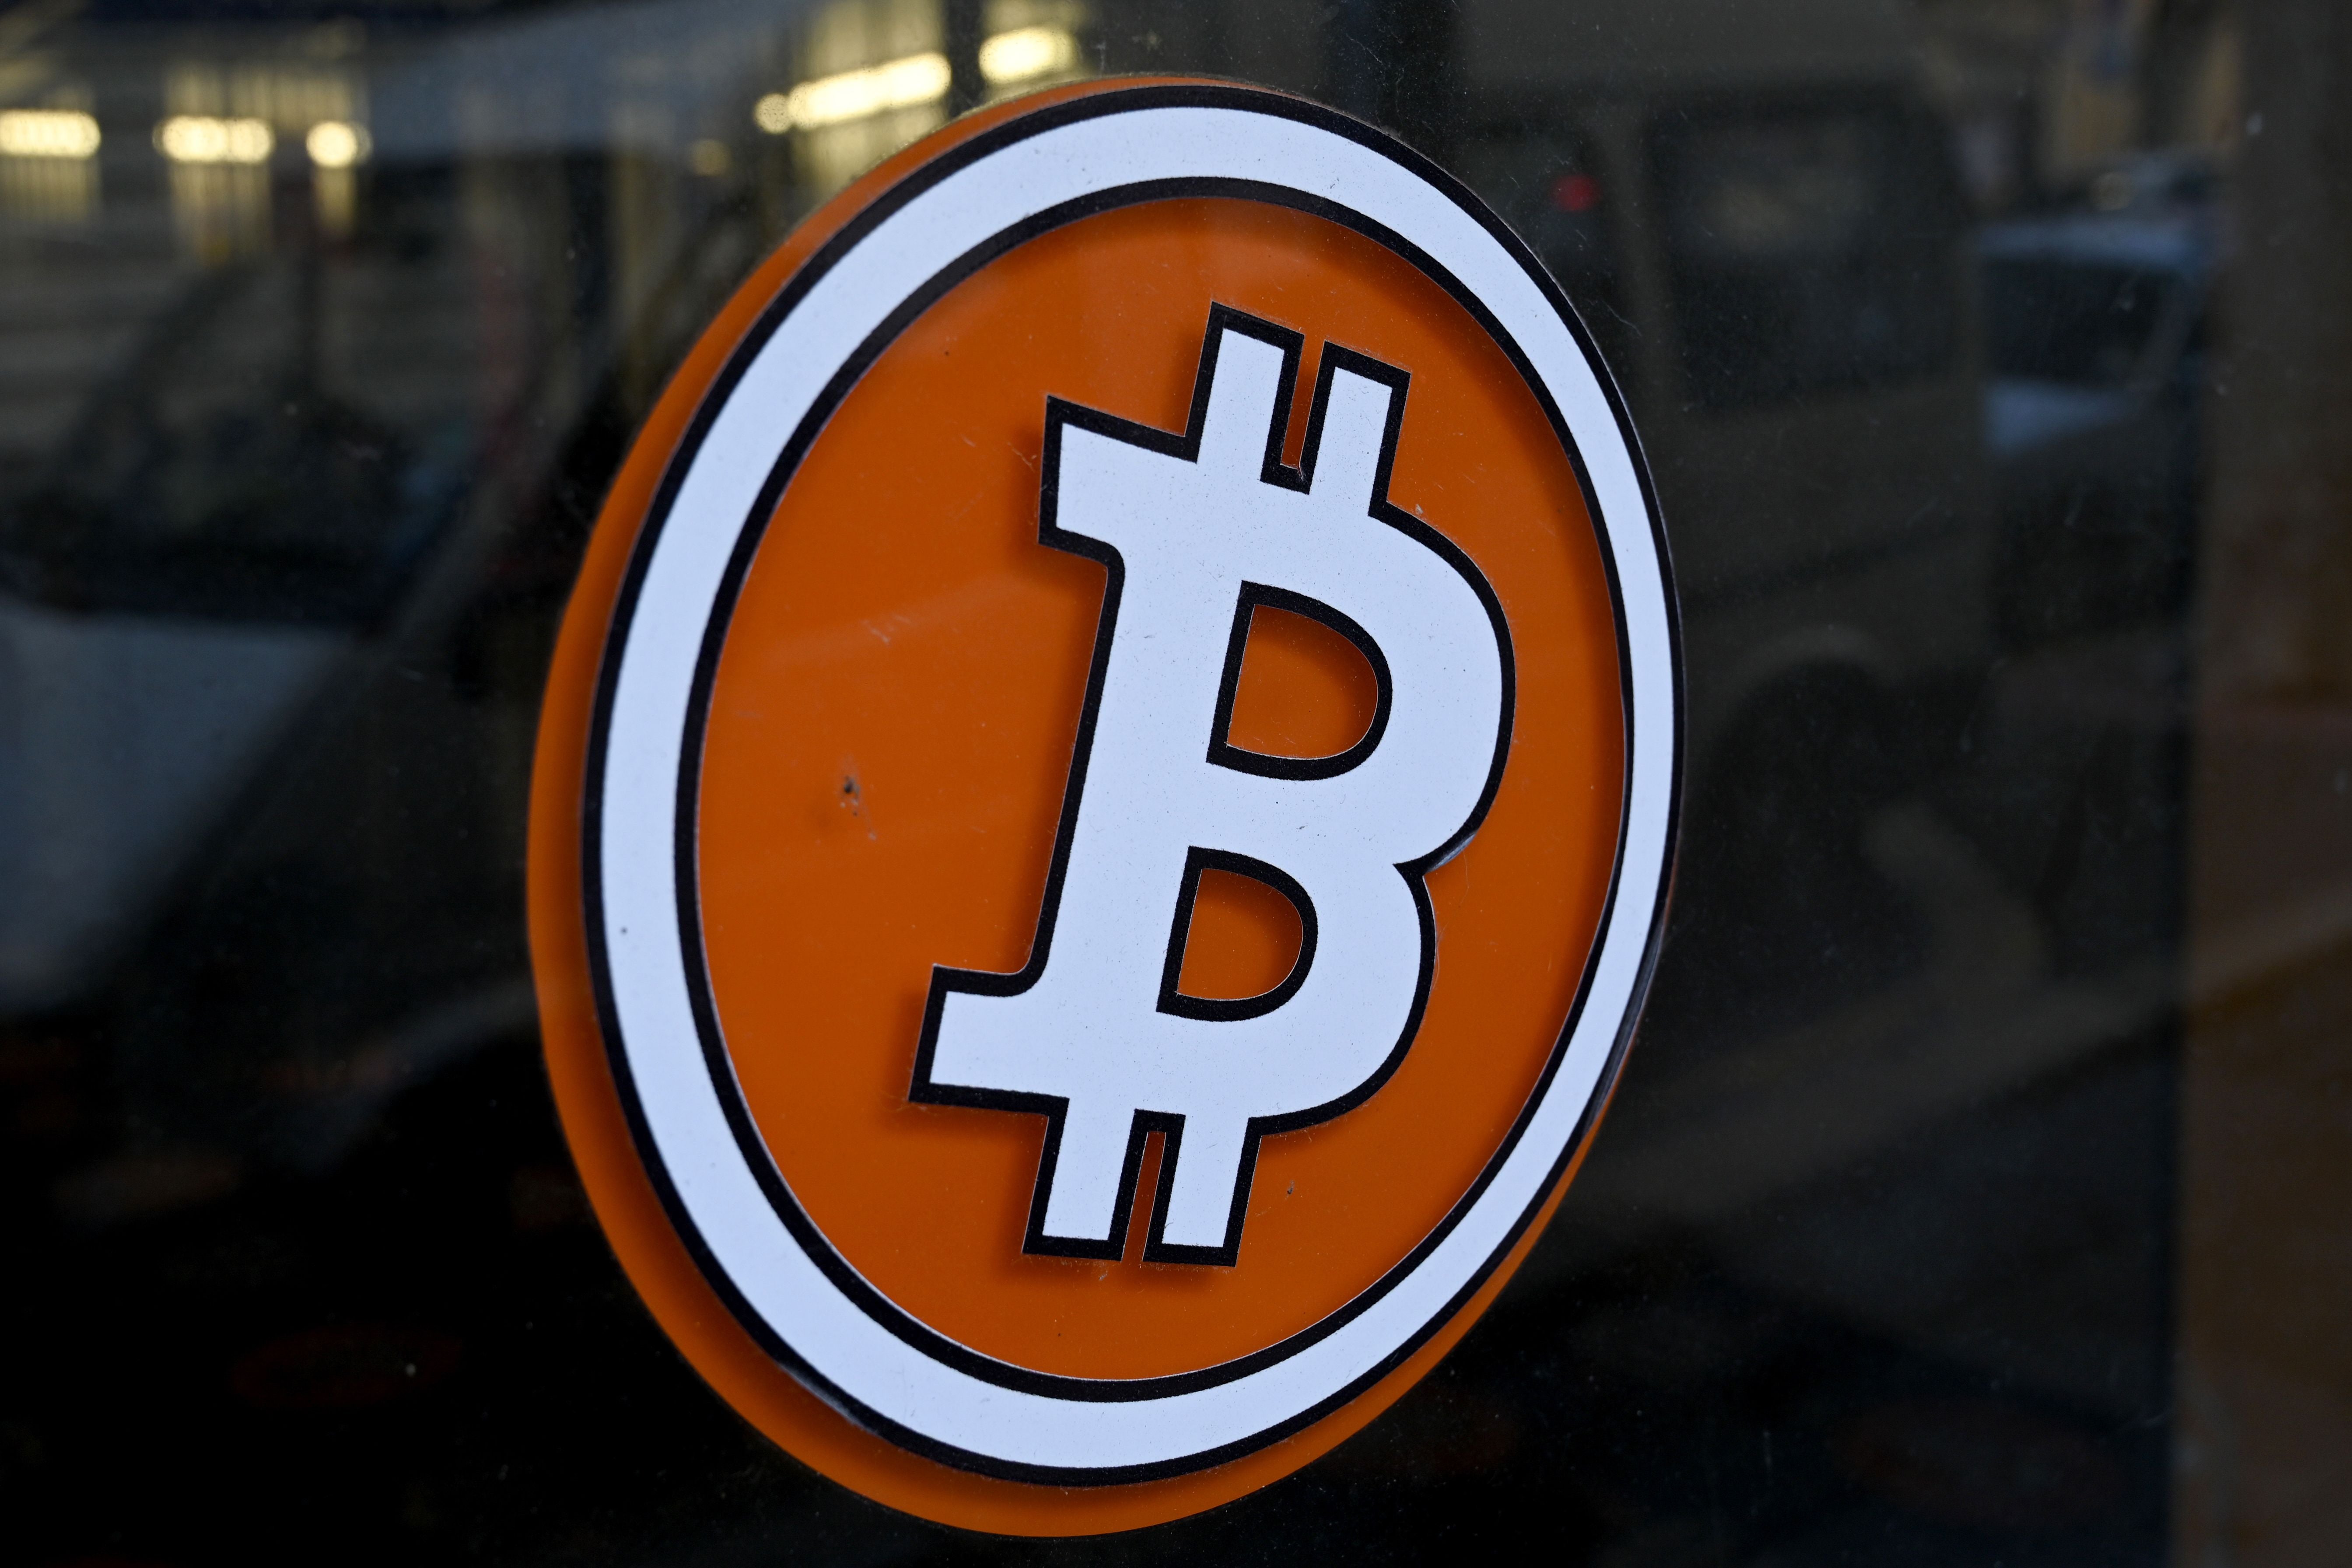 <p>The logo of Bitcoin digital currency is pictured on the front door of an ATM in Marseille, southern France</p>